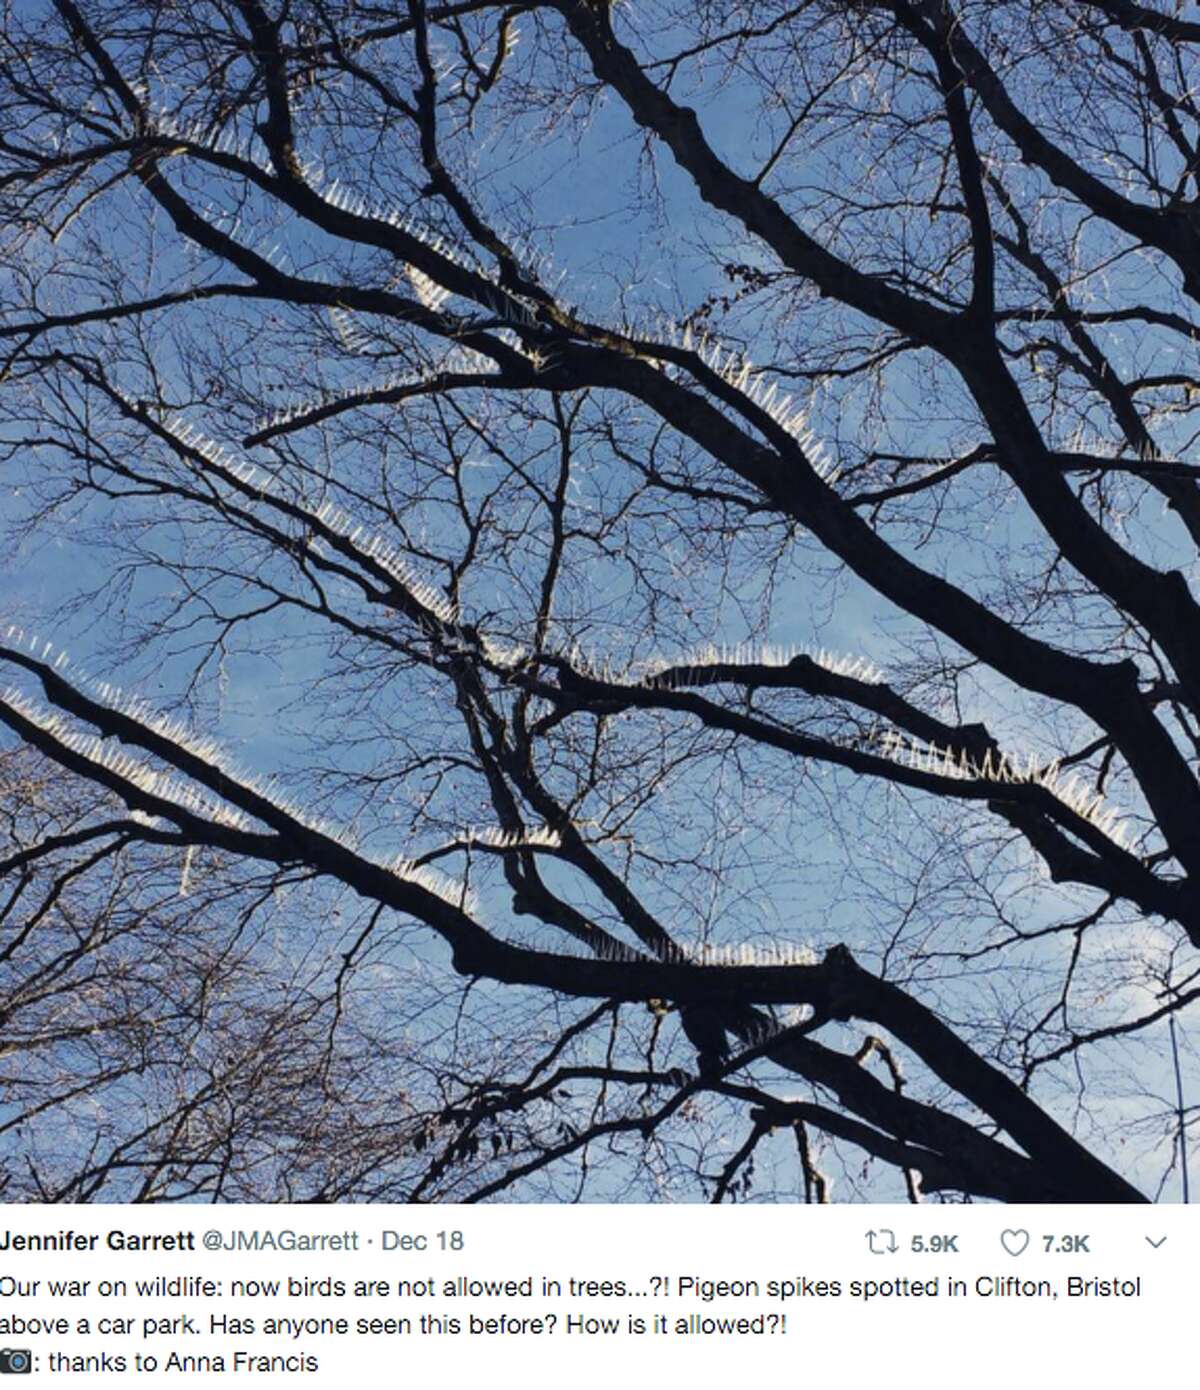 When word began spreading that an upscale British neighborhood had installed anti-bird spikes on its trees, some took to Twitter to express their outrage.